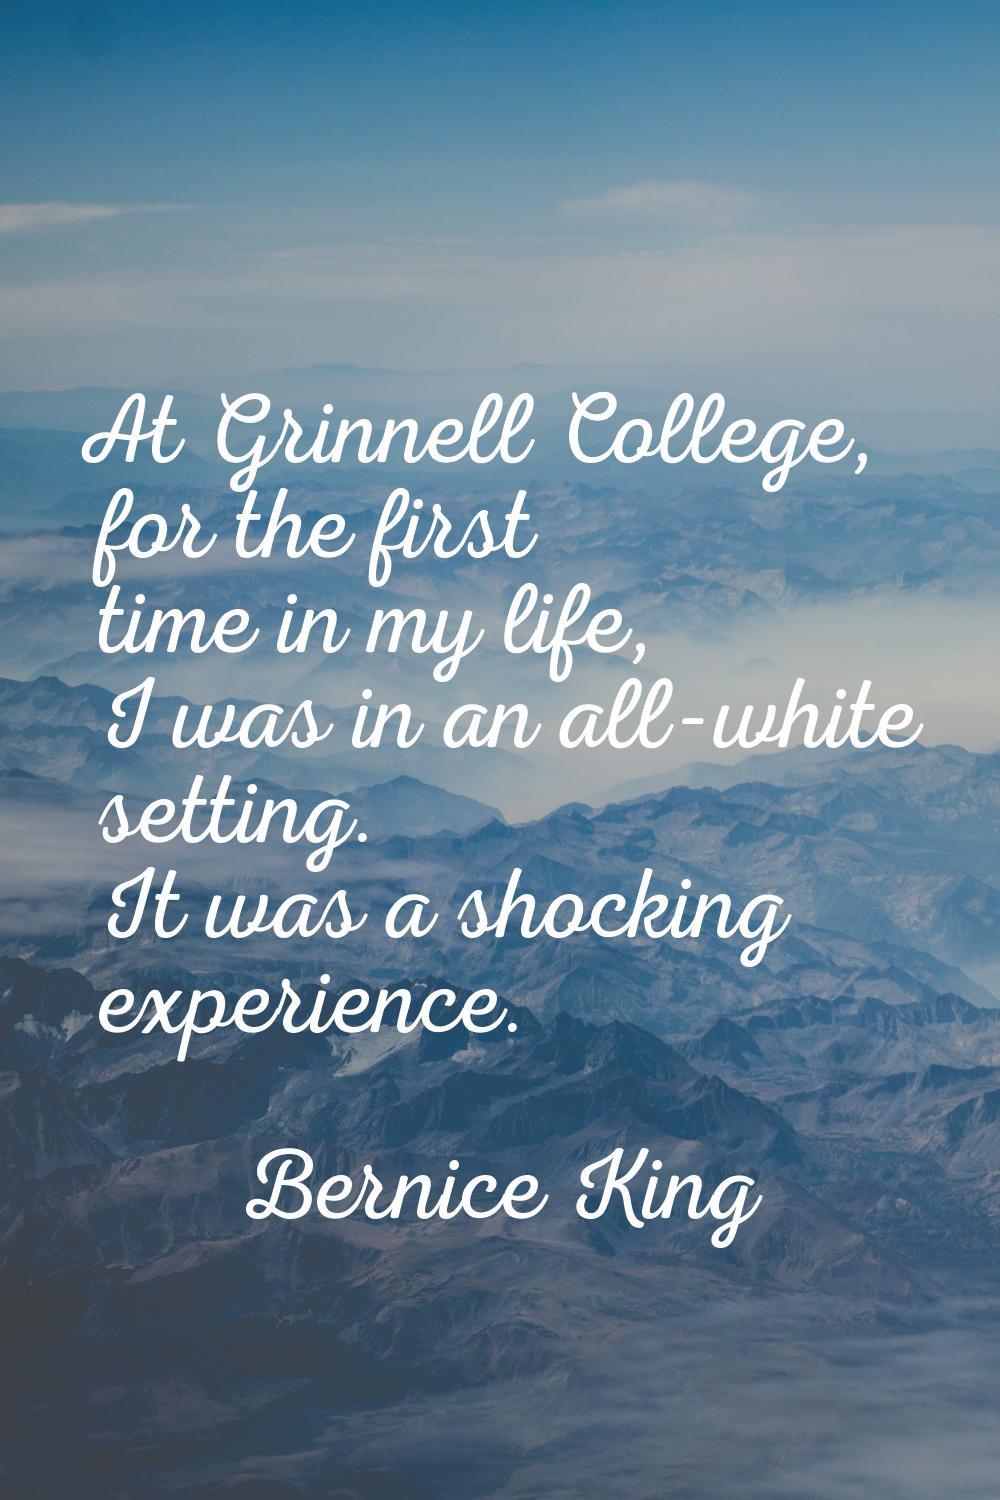 At Grinnell College, for the first time in my life, I was in an all-white setting. It was a shockin